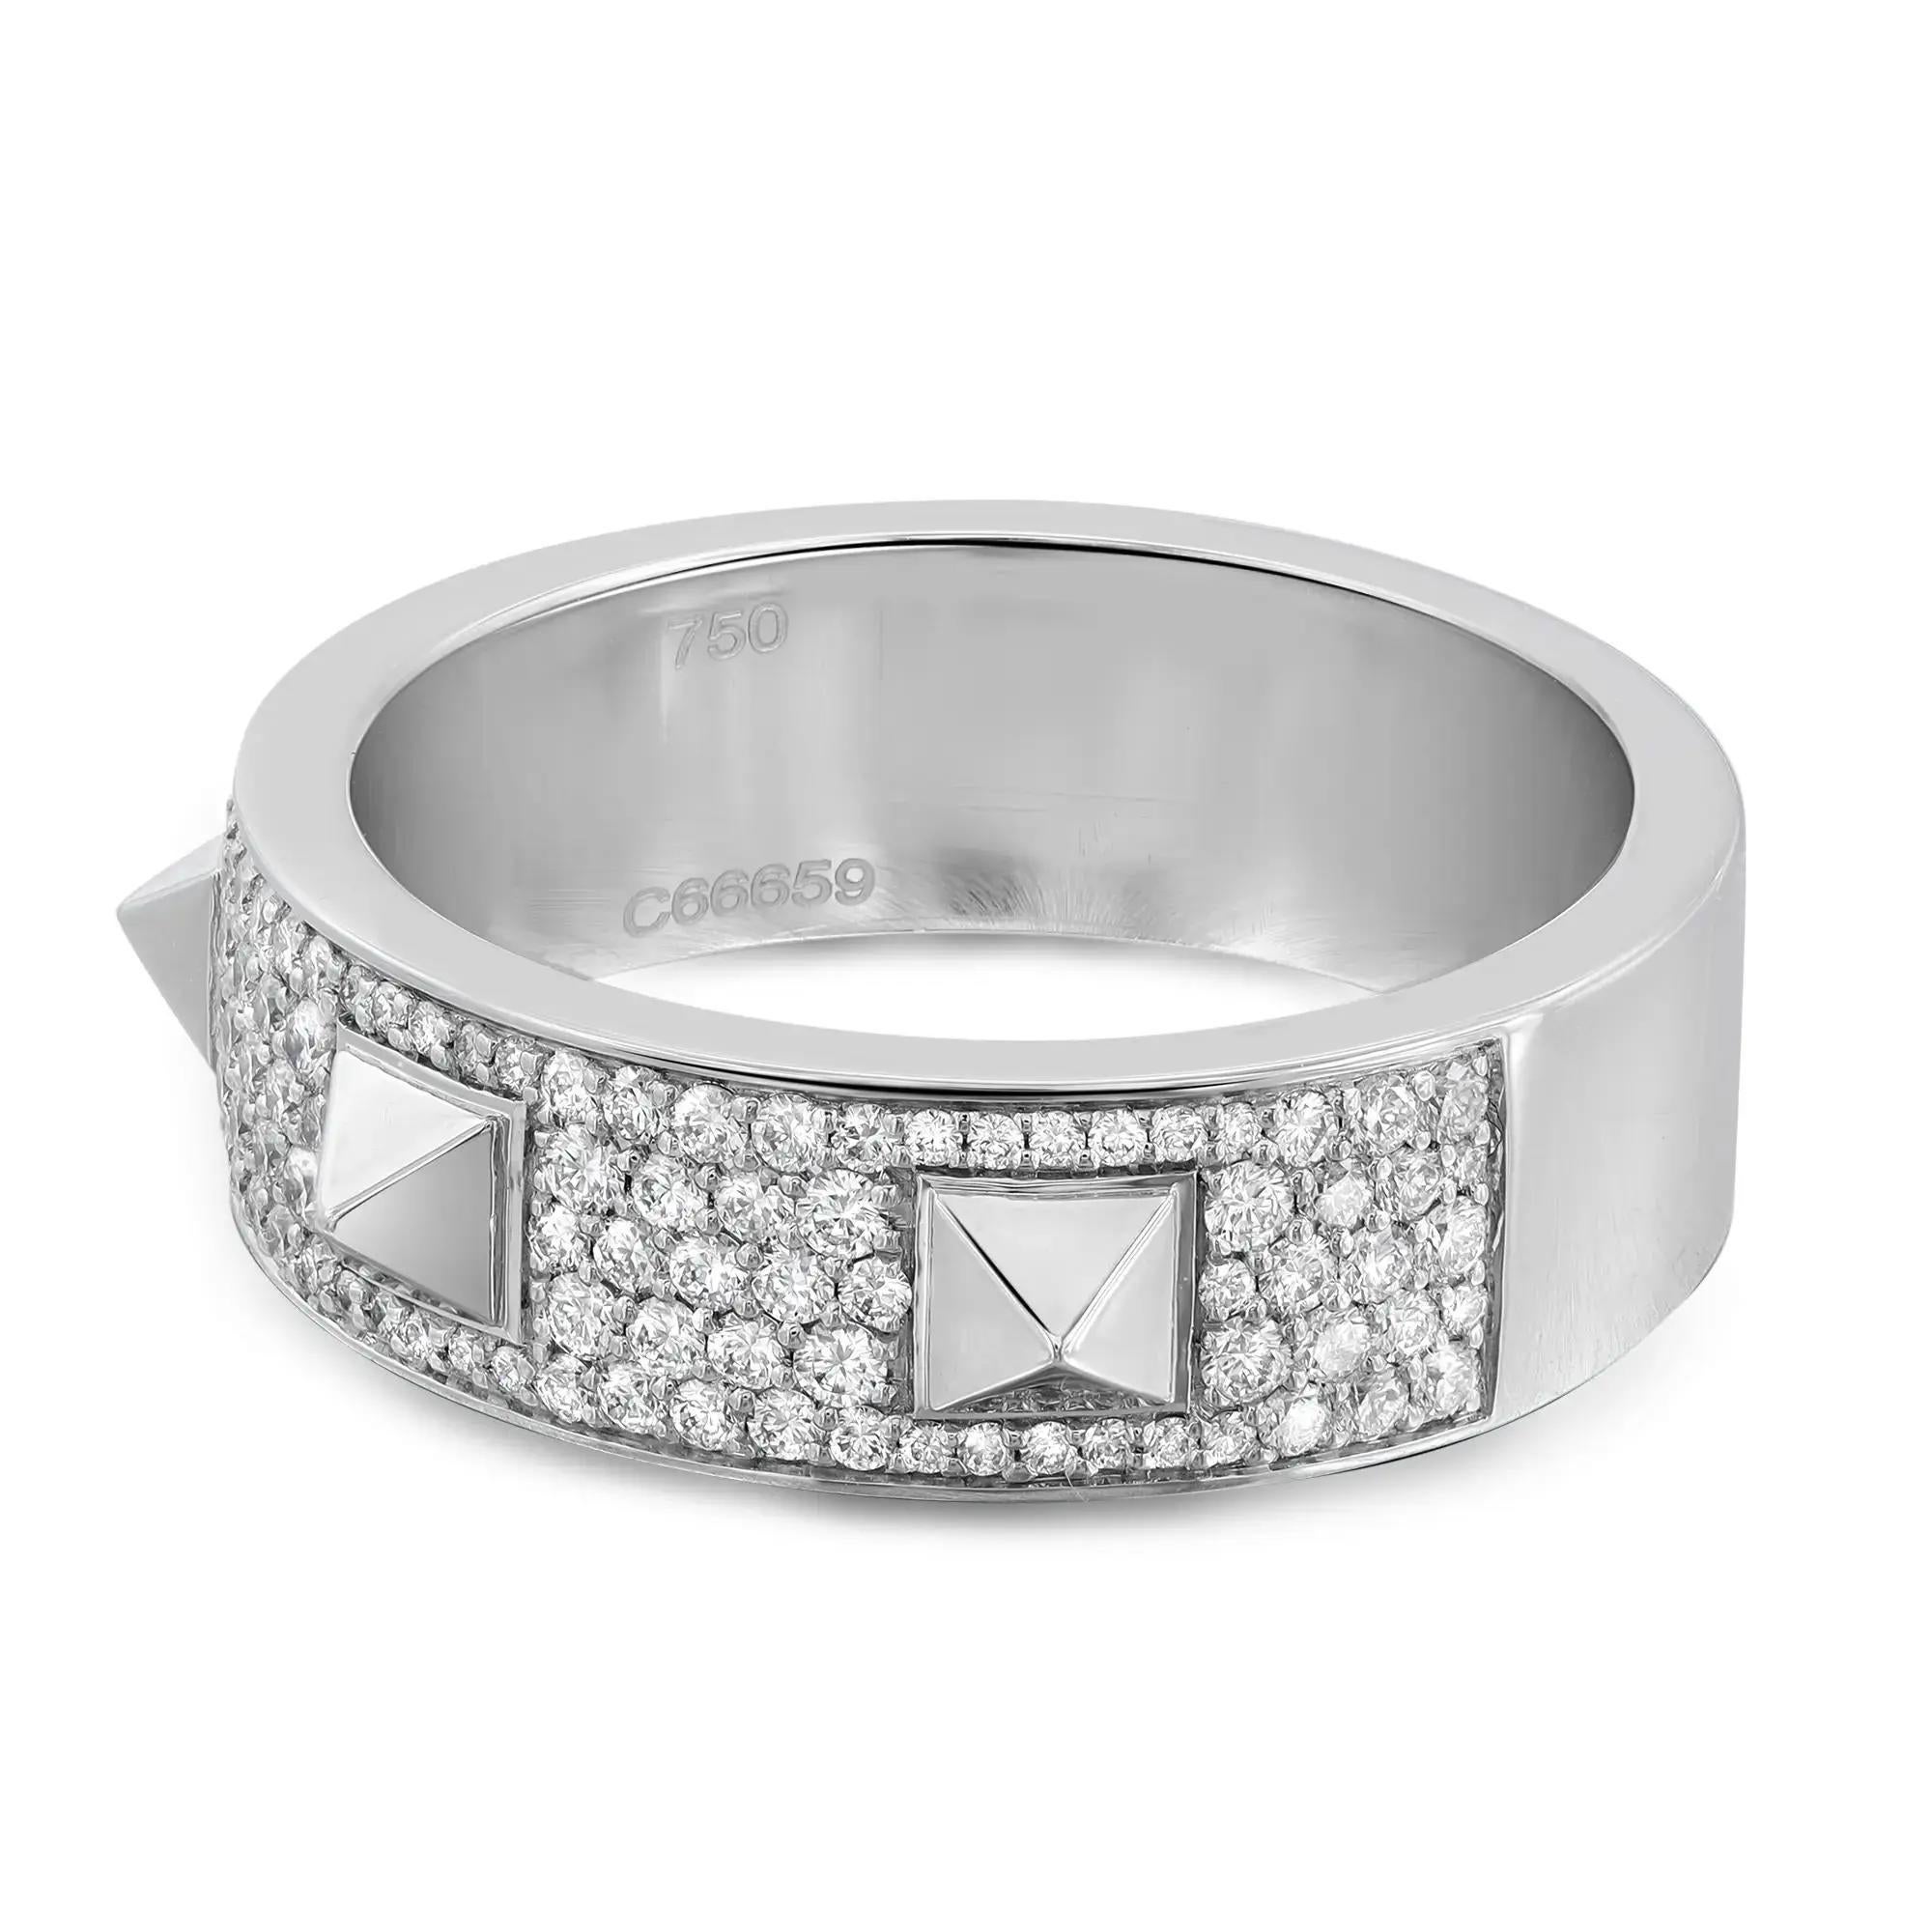 Bold and contemporary, Messika Spiky diamond band ring. Crafted in lustrous 18K white gold. It features pave set round brilliant cut diamonds studded halfway through the band with three spikes giving it a unique look. Total diamond weight: 0.61